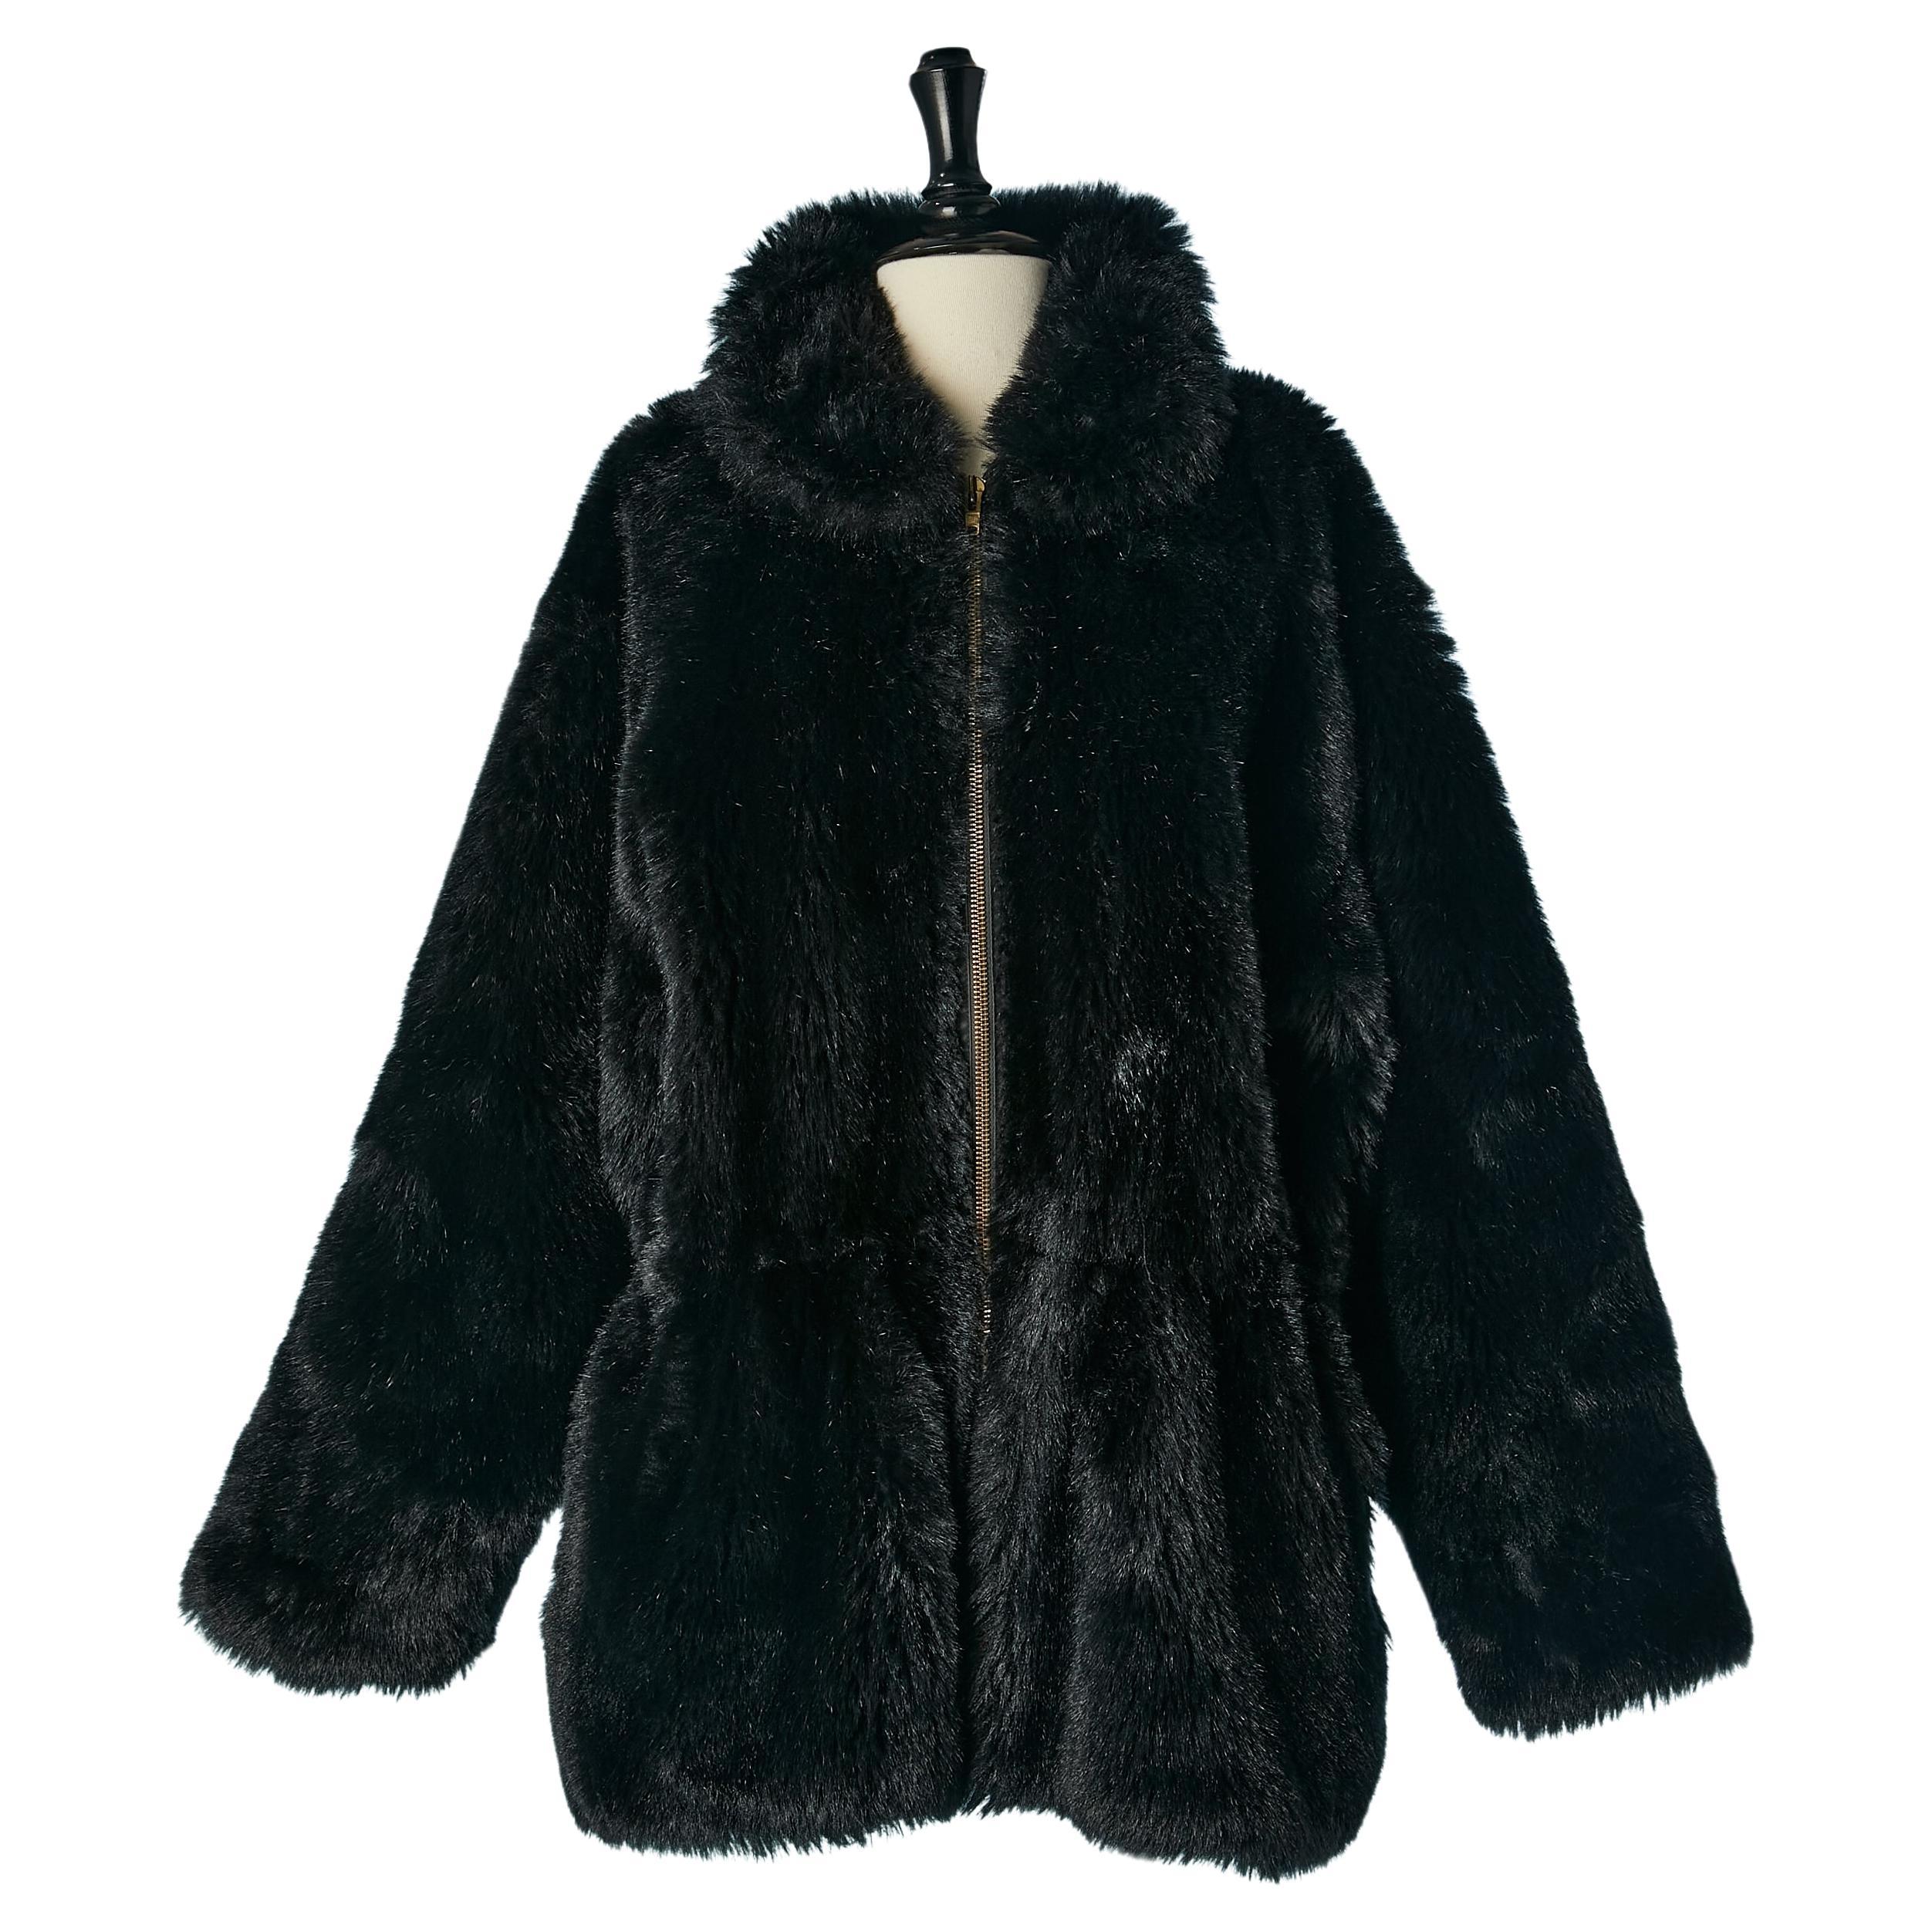 Black faux-fur jacket with zip in the middle front Sonia Rykiel  For Sale